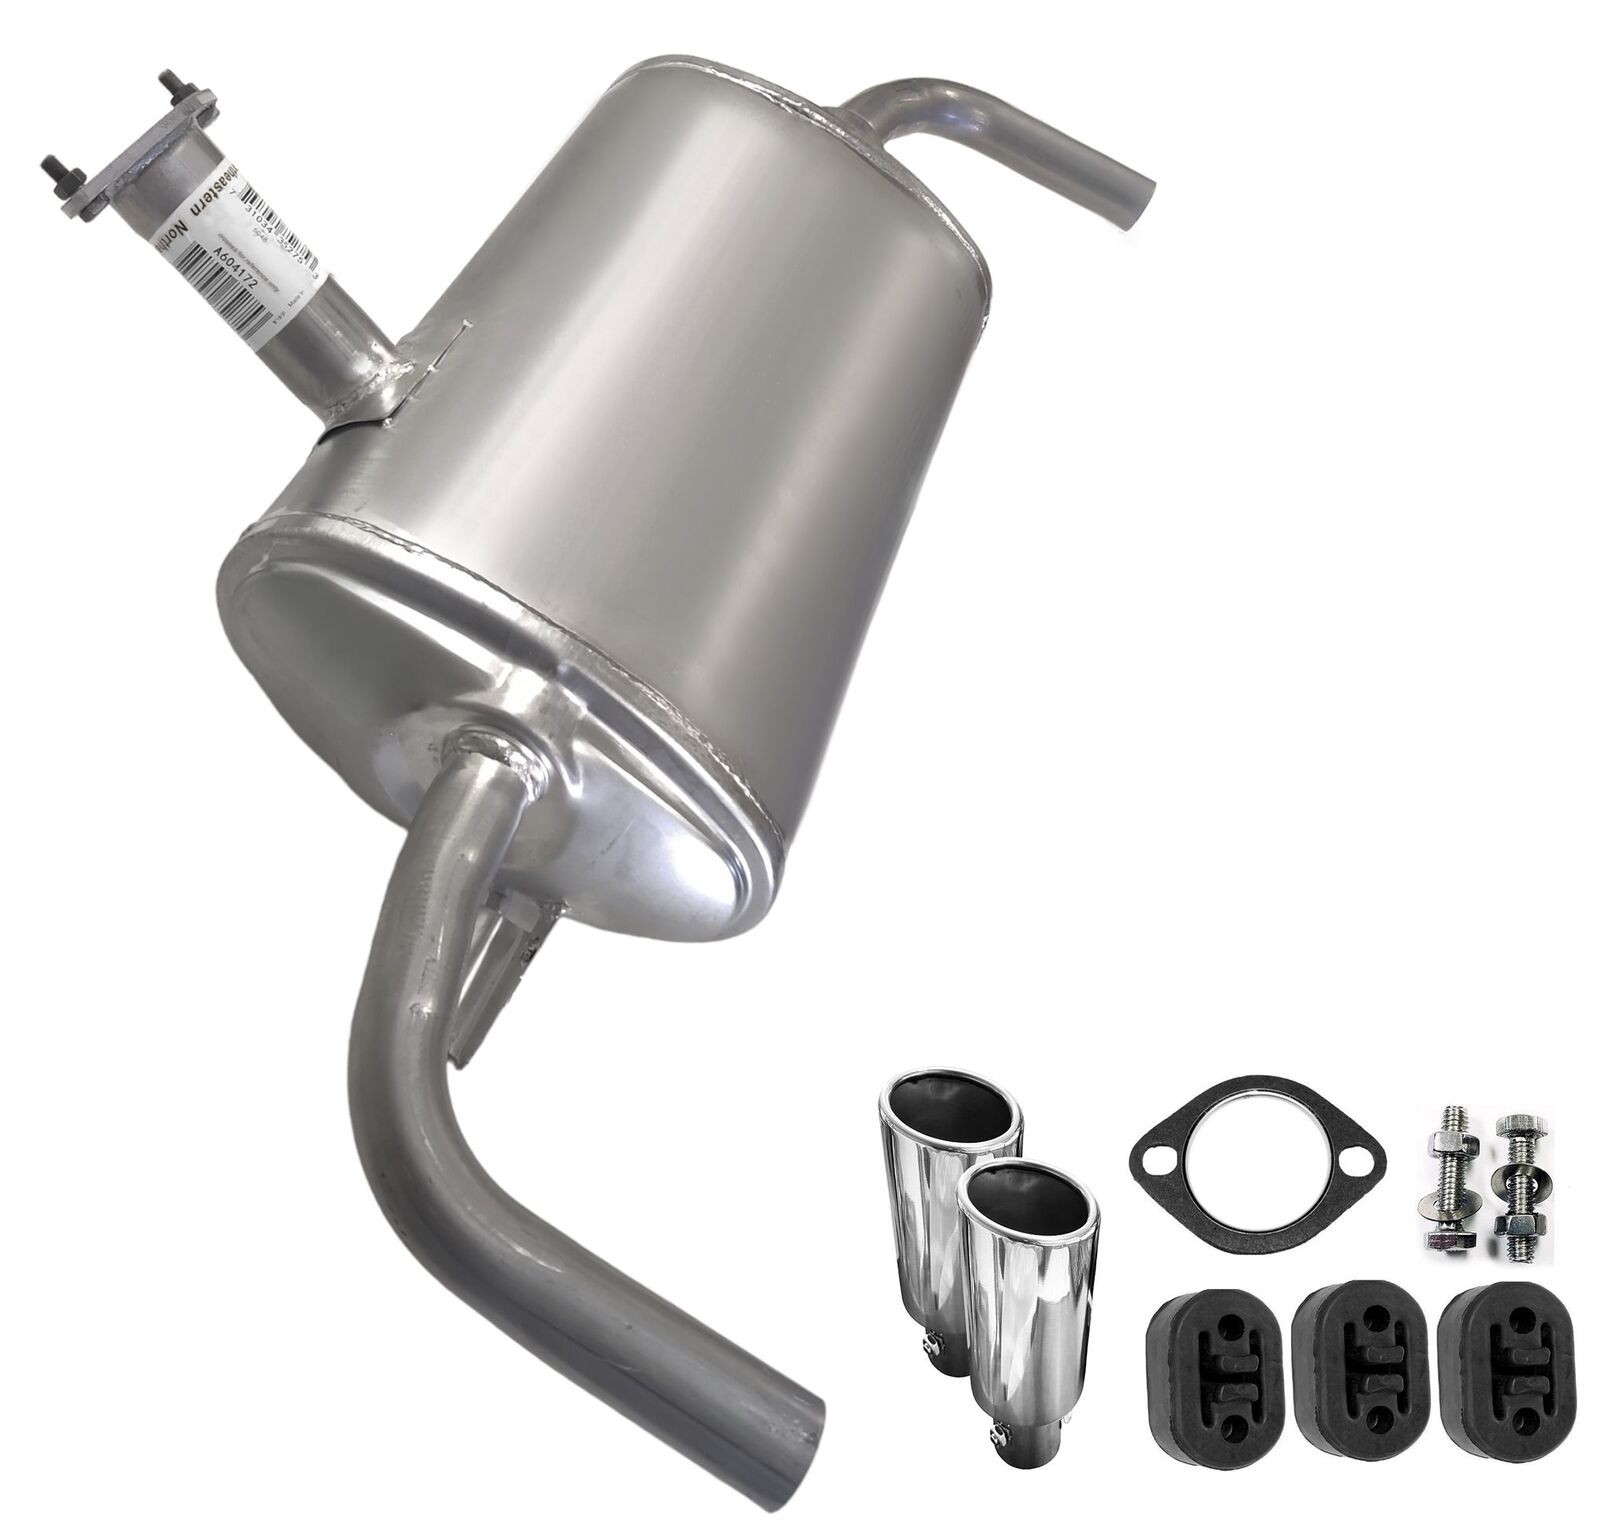 Exhaust Dual Tailpipe Muffler fits: 2008-2013 Nissan Altima Coupe 2.5L 3.5L